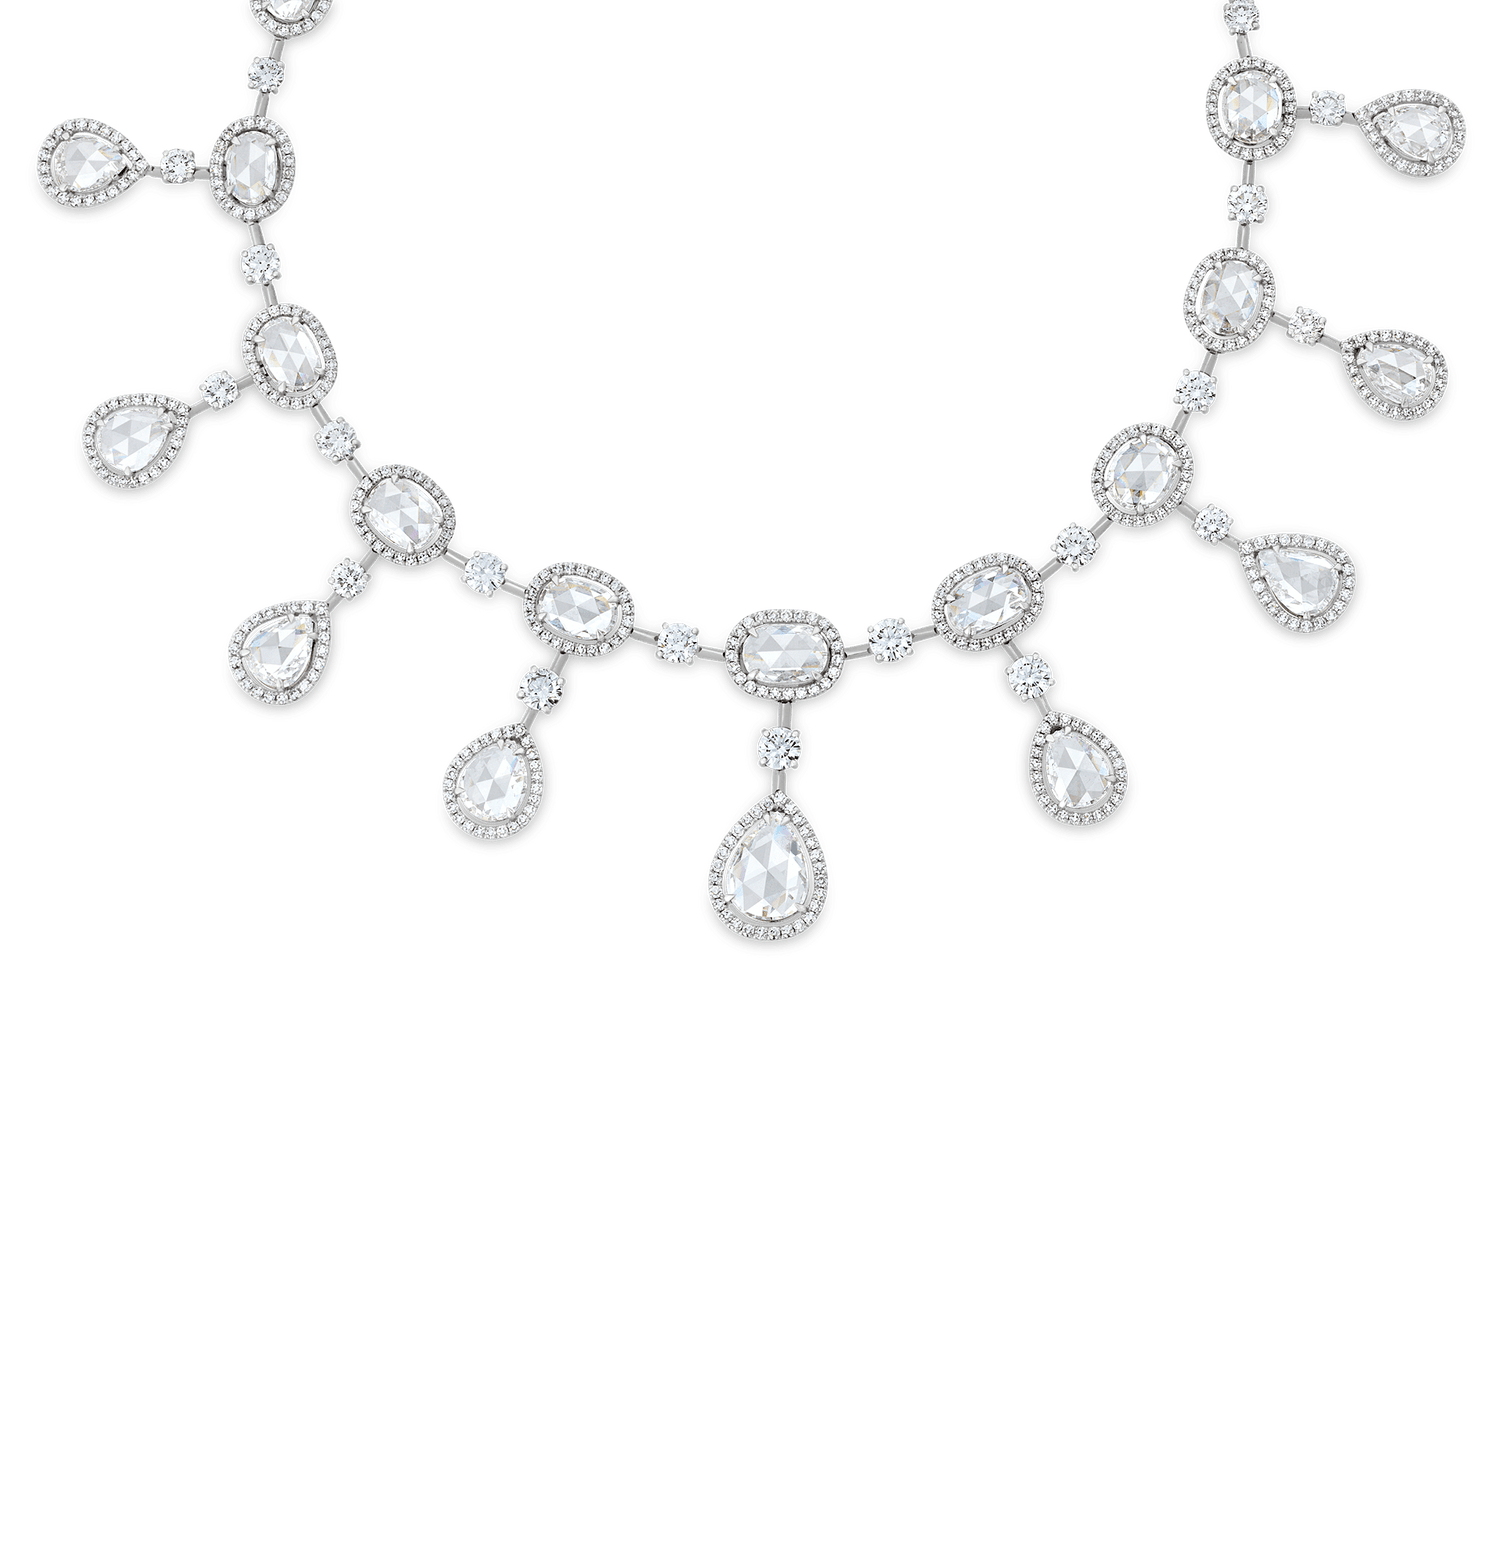 Rose Cut Diamond Necklace and Earrings, 61.28 carats